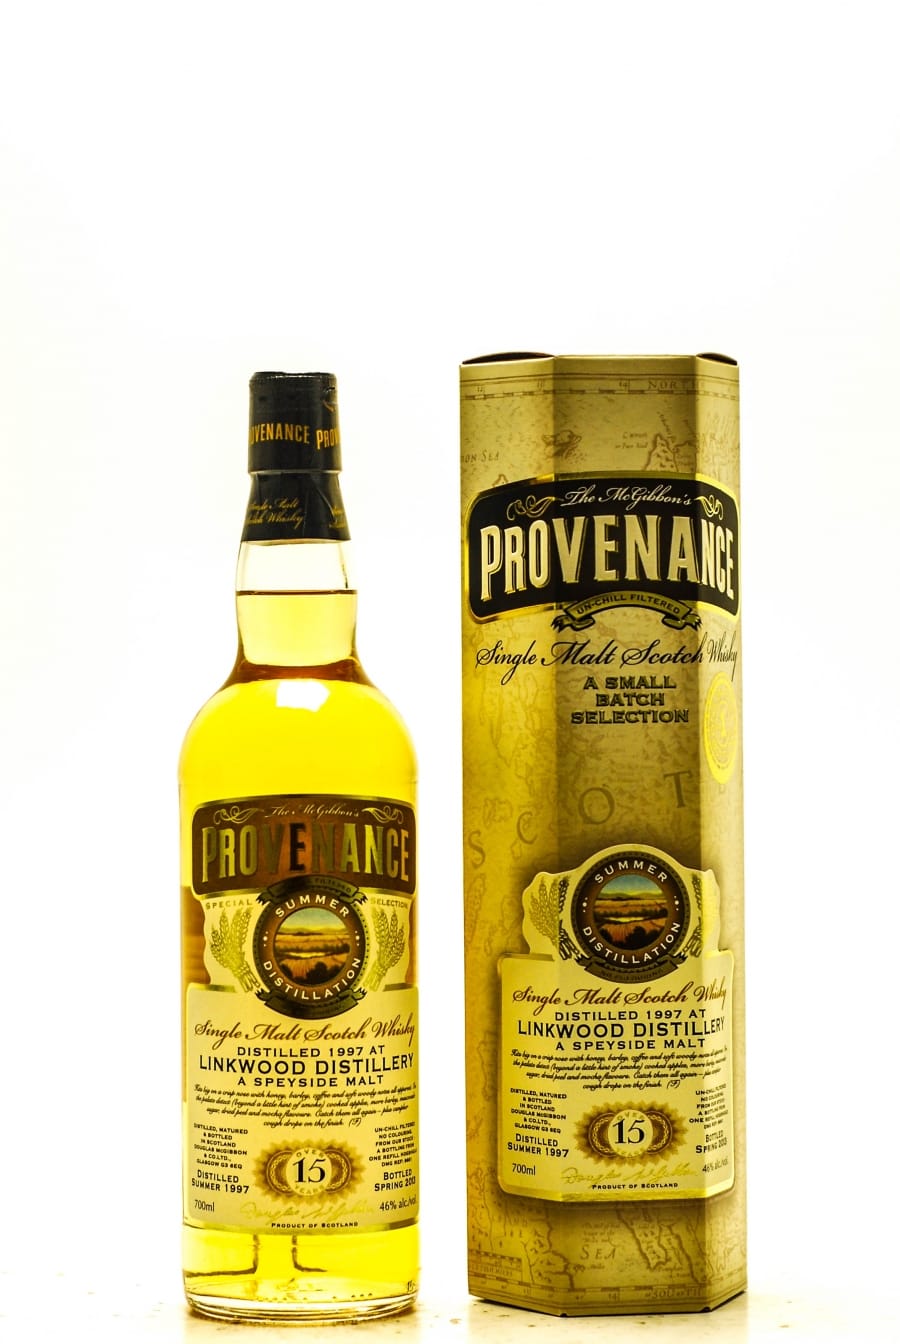 Linkwood - Over 15 Years Old McGibbon's Provenance Cask:DMG9661 46% 1997 Perfect